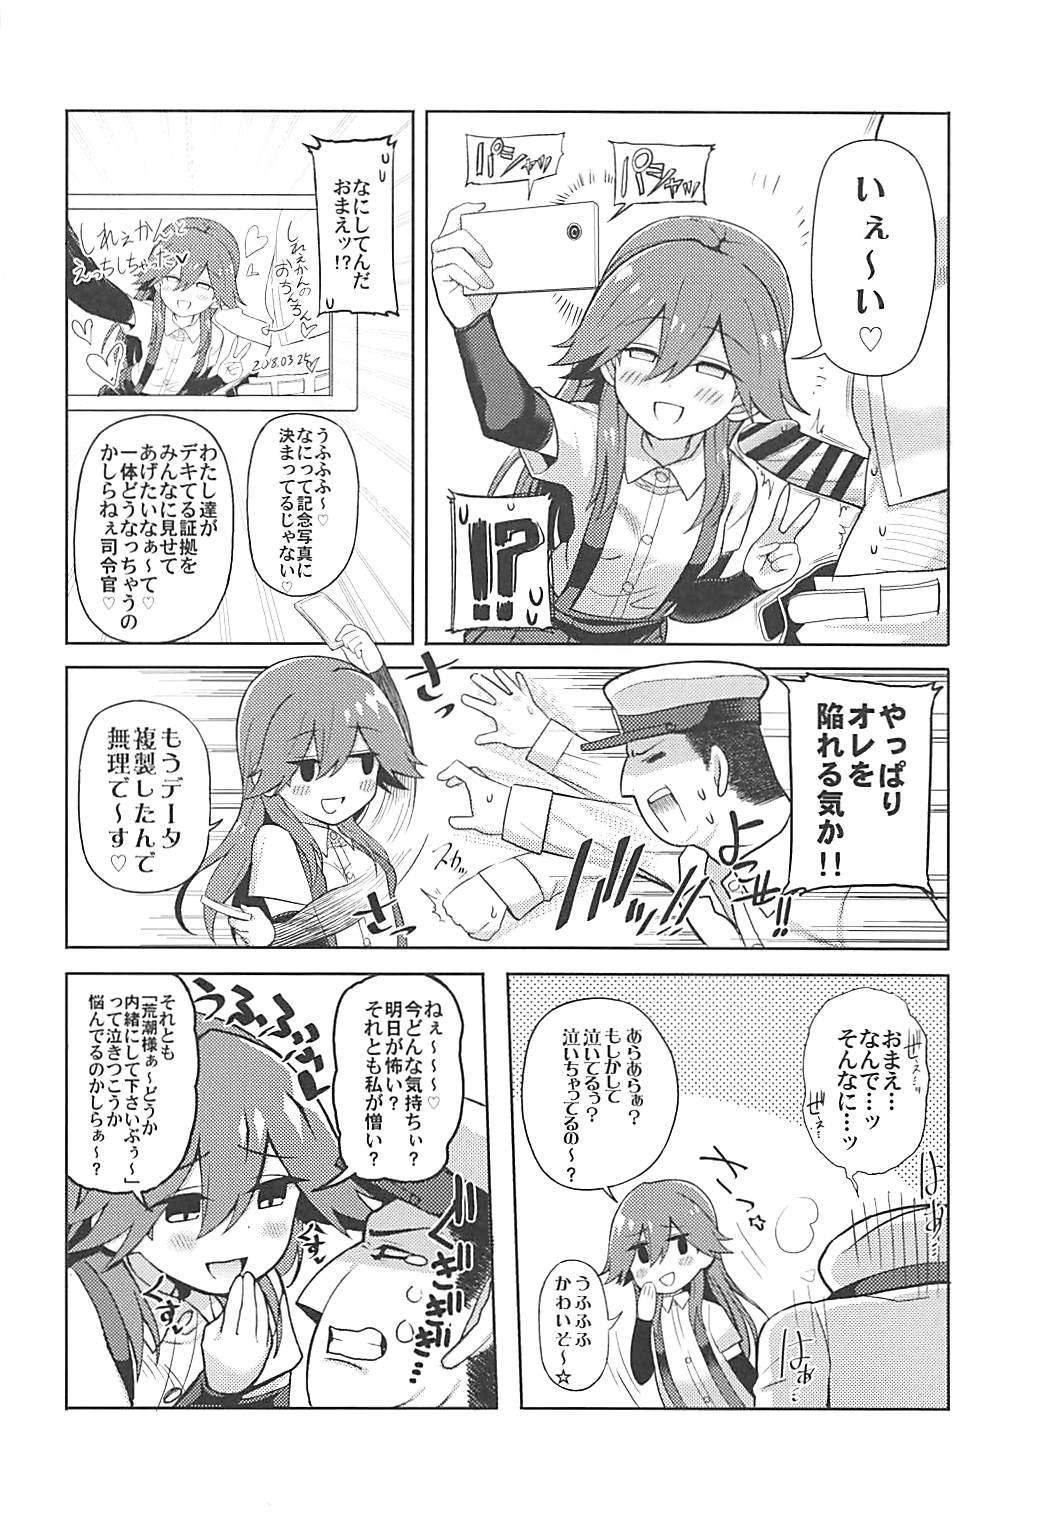 Sexteen Little Girl Sweet Trap! - Kantai collection Cosplay - Page 9